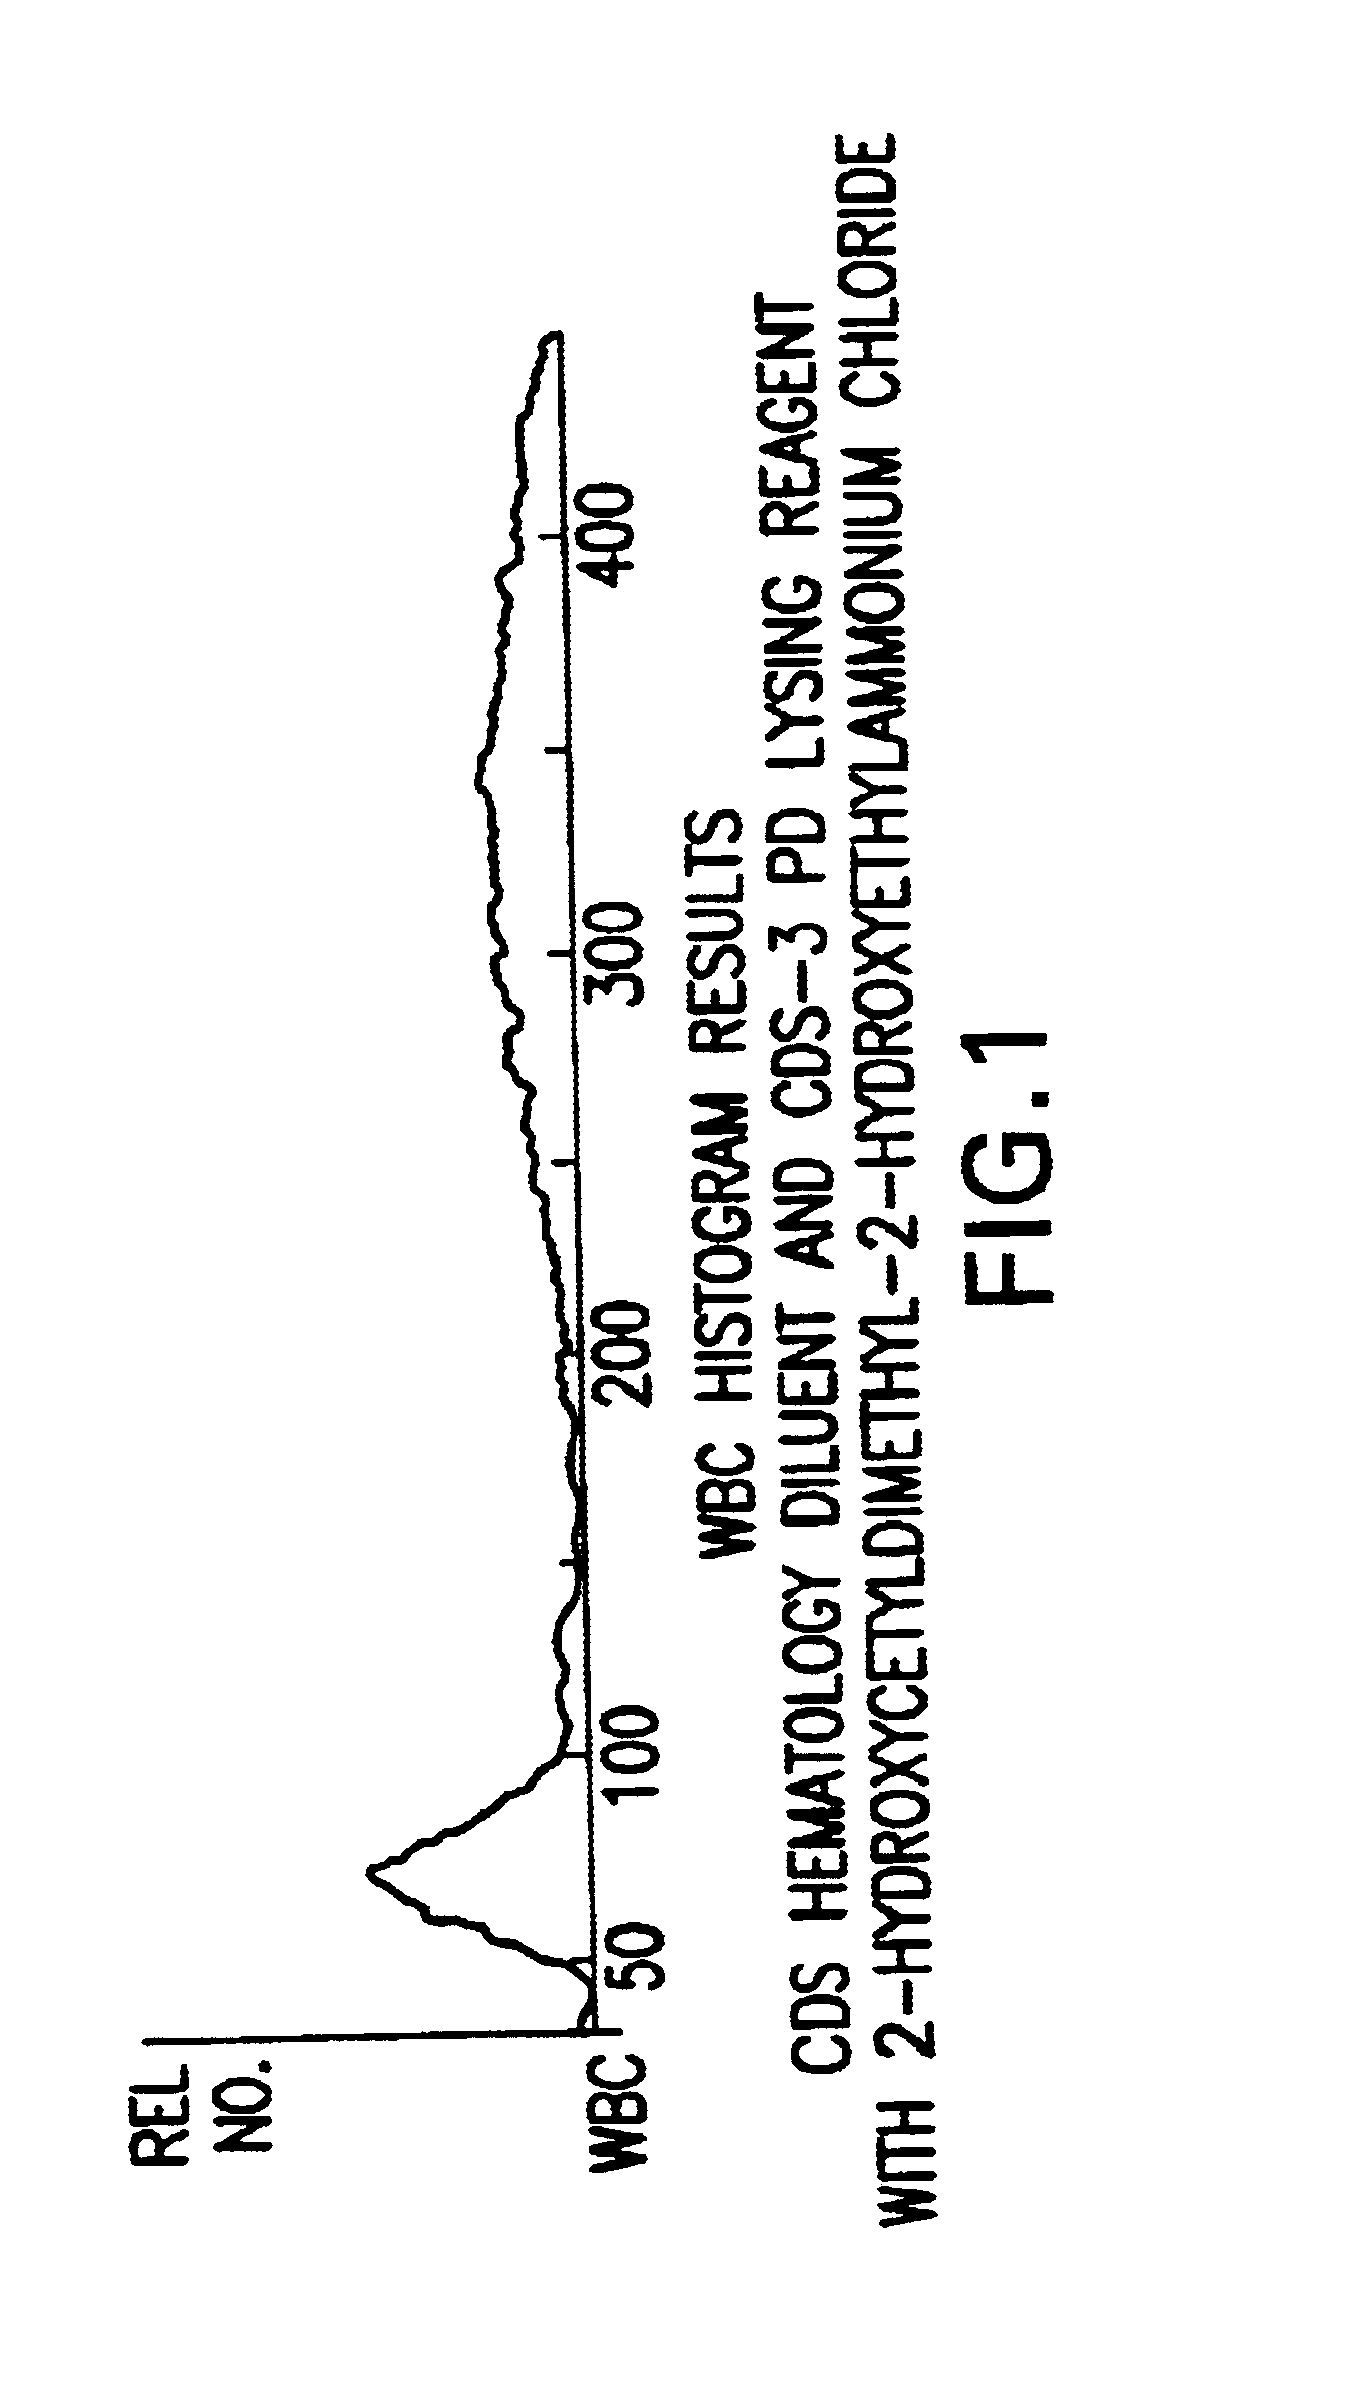 Multi-purpose reagent system and method for enumeration of red blood cells, white blood cells and thrombocytes and differential determination of white blood cells